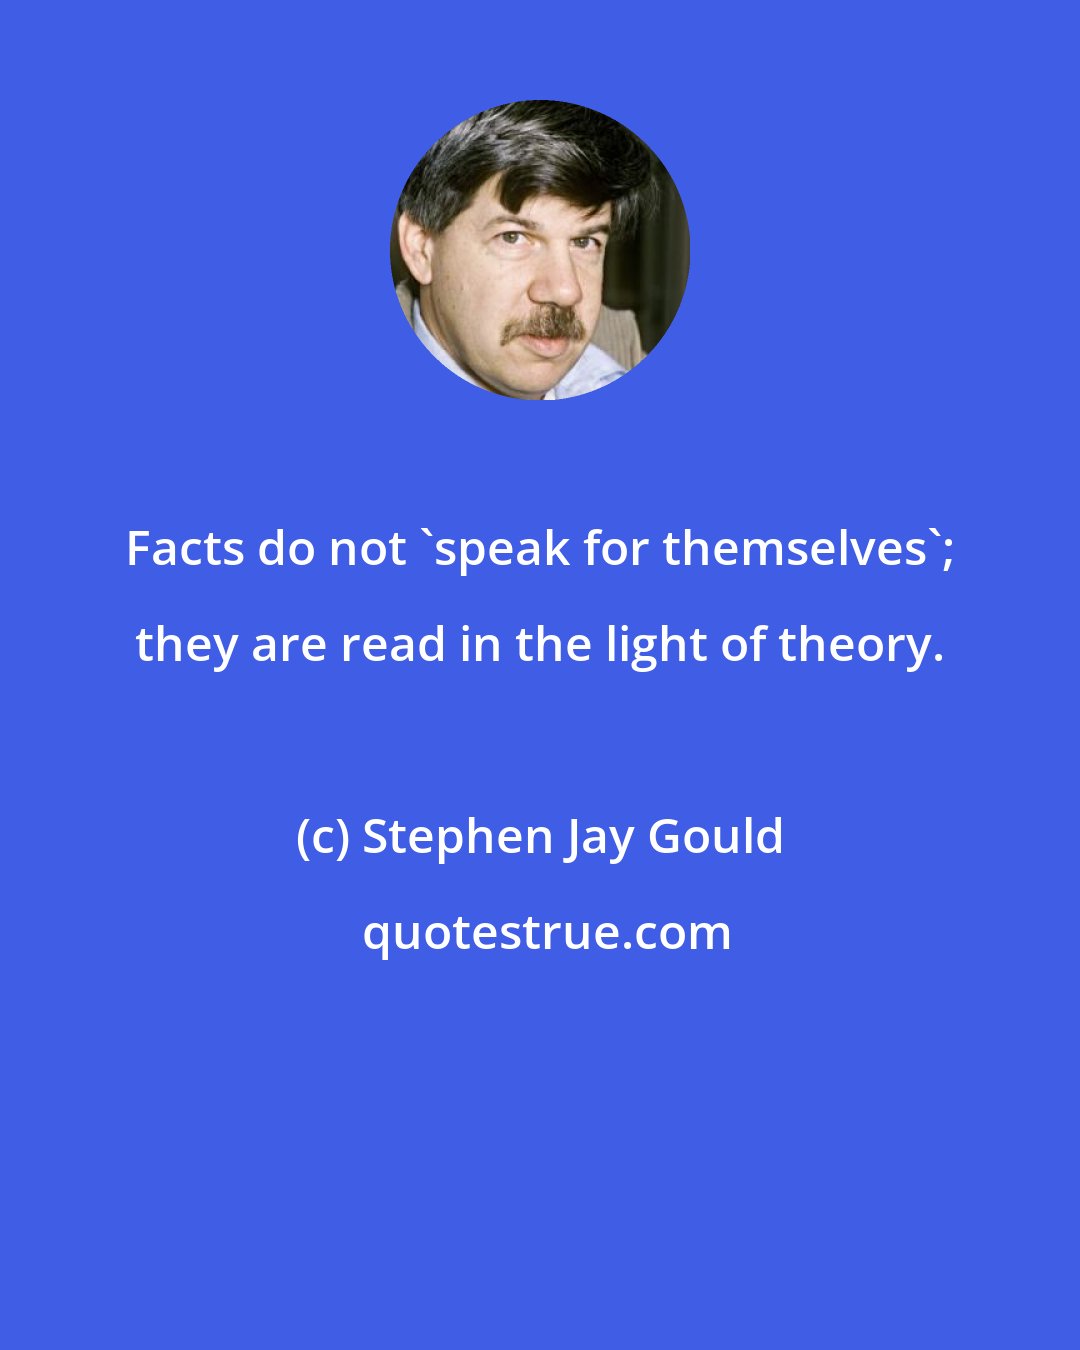 Stephen Jay Gould: Facts do not 'speak for themselves'; they are read in the light of theory.